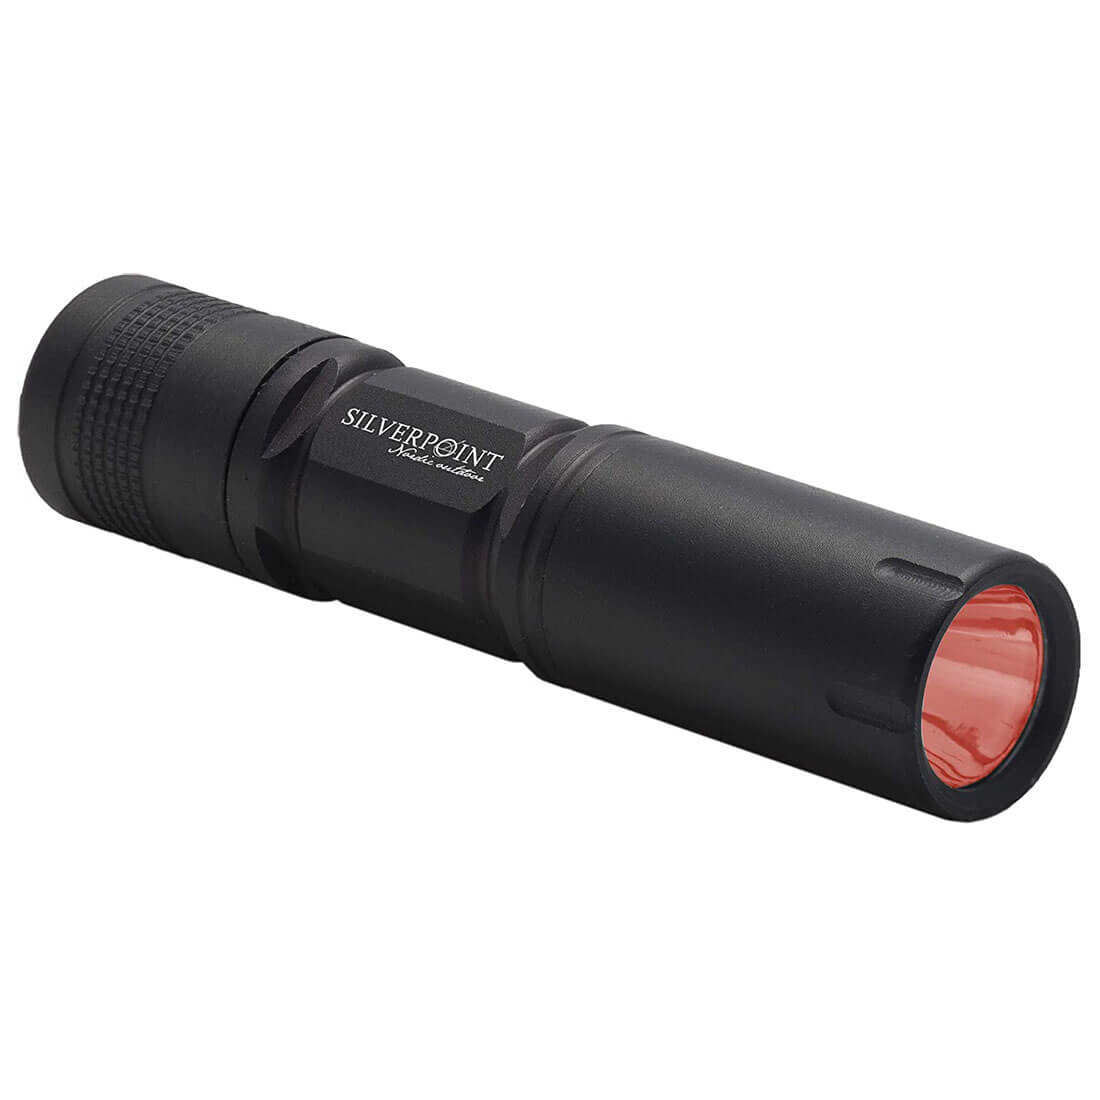 Silverpoint Firefly LED Red Light Torch - John Bull Clothing